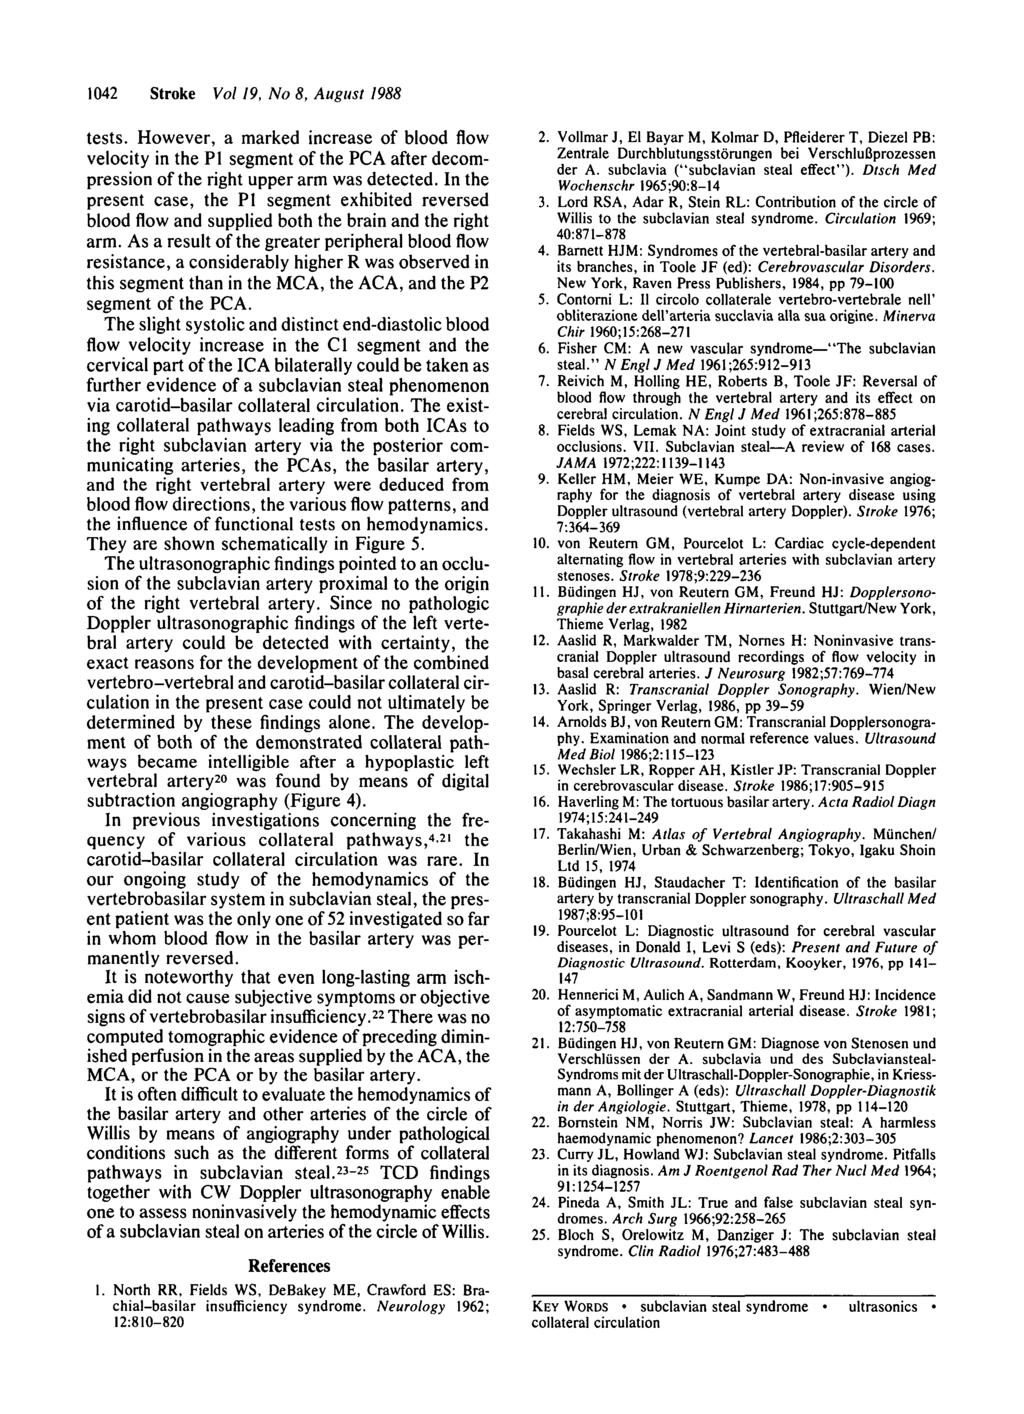 1042 Stroke Vol 19, No 8, August 1988 tests. However, a marked increase of blood flow velocity in the PI segment of the PCA after decompression of the right upper arm was detected.